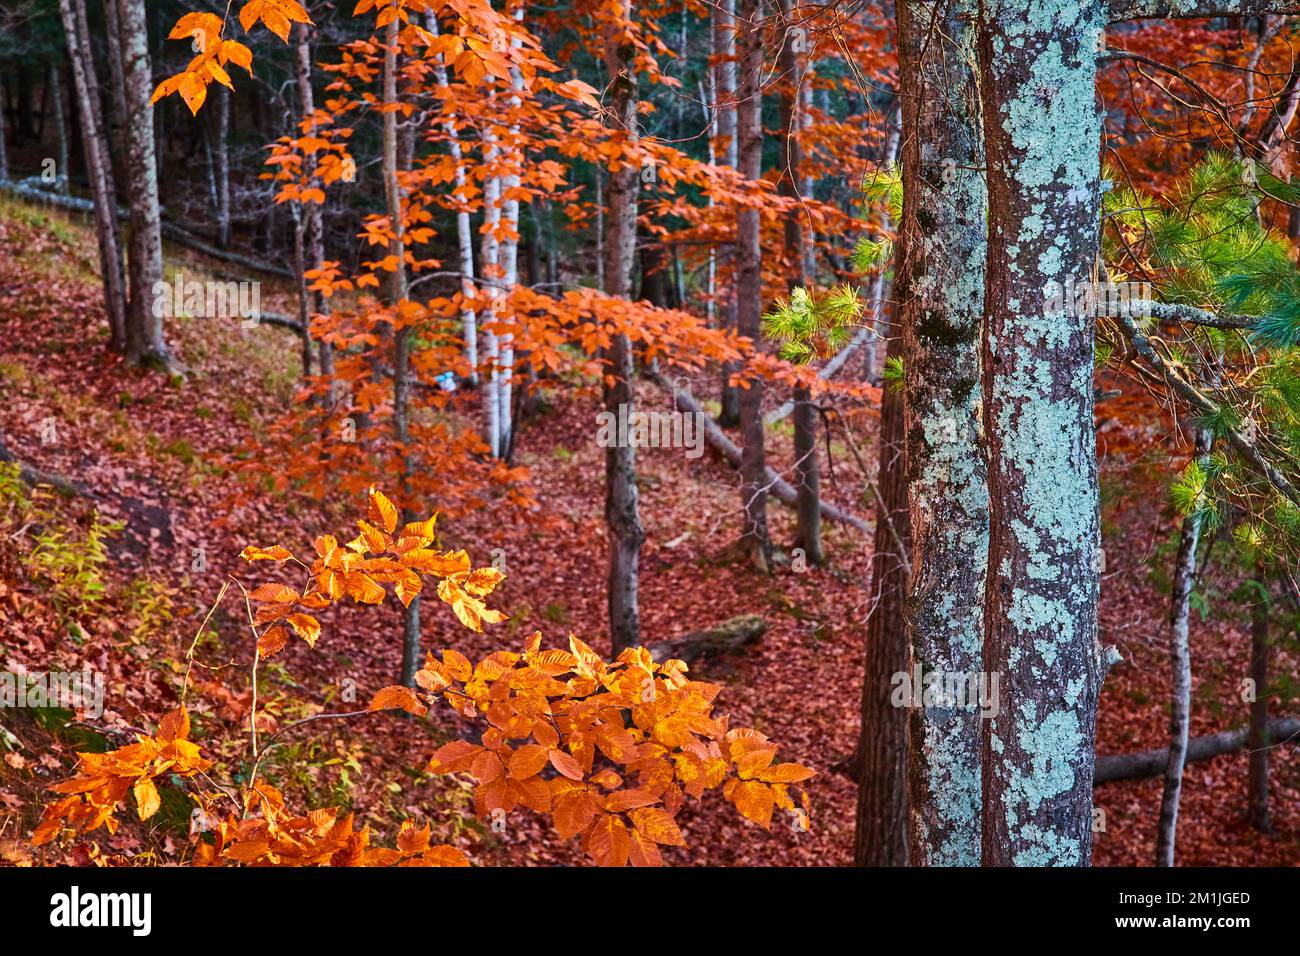 Late fall forest of orange leaves and focus on tree bark with lichen Stock Photo